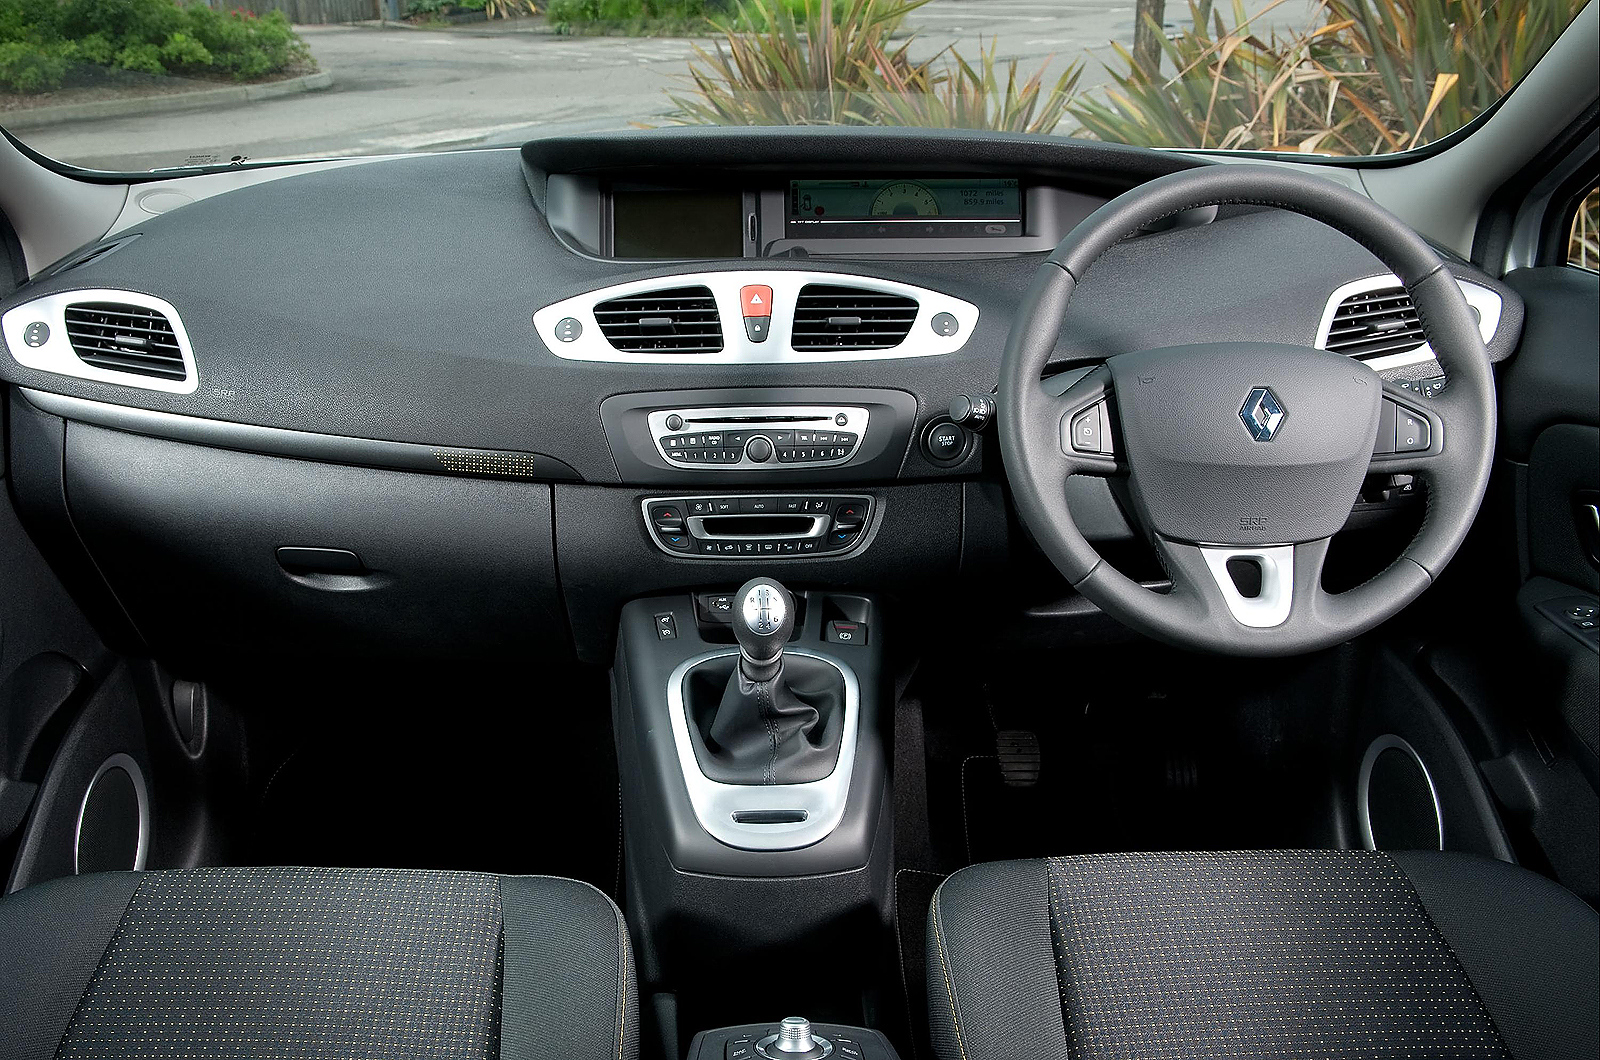 Used Renault Scenic 2009-2016 review